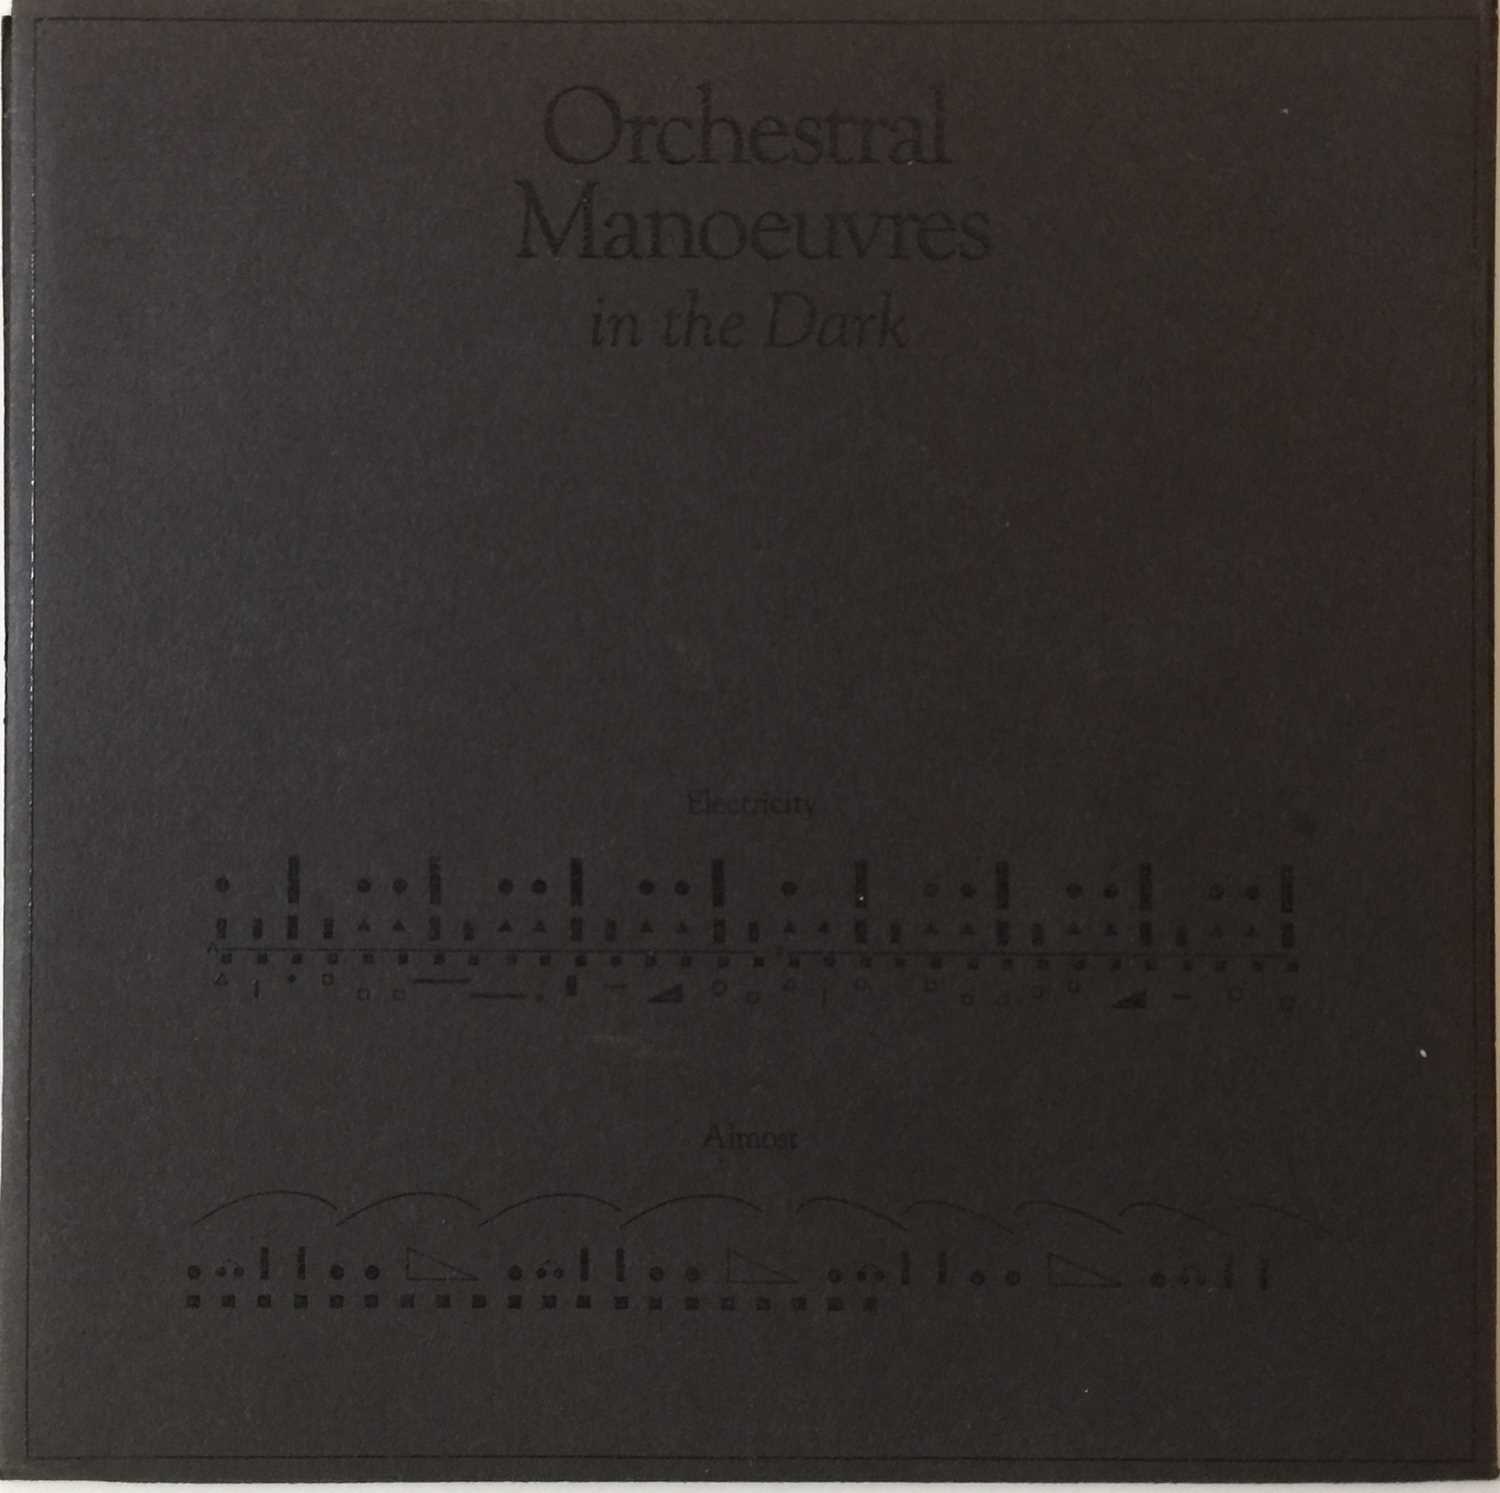 Lot 338 - ORCHESTRAL MANOEUVRES IN THE DARK - ELECTRICITY 7" (ORIGINAL UK 'BRAILLE' SLEEVE COPY - FACTORY FAC 6)